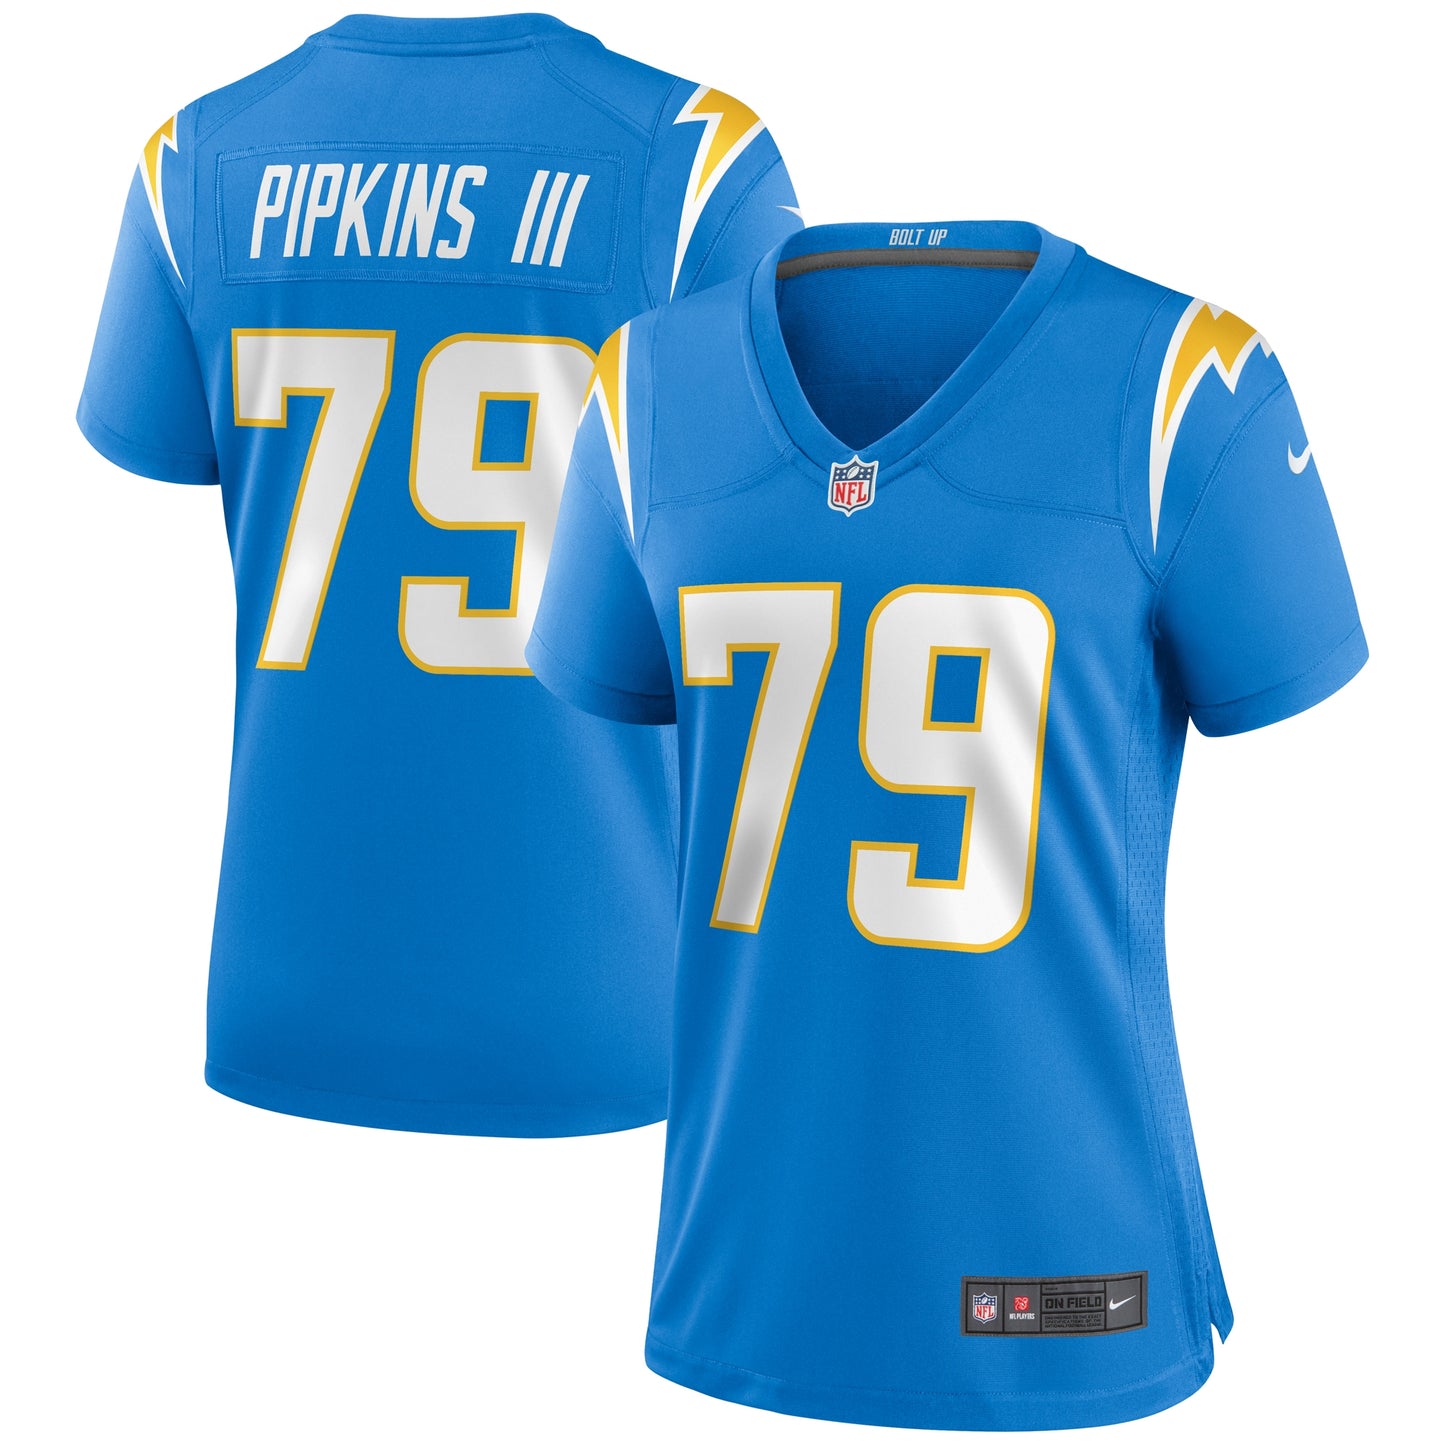 Trey Pipkins III Los Angeles Chargers Nike Women's Game Jersey - Powder Blue